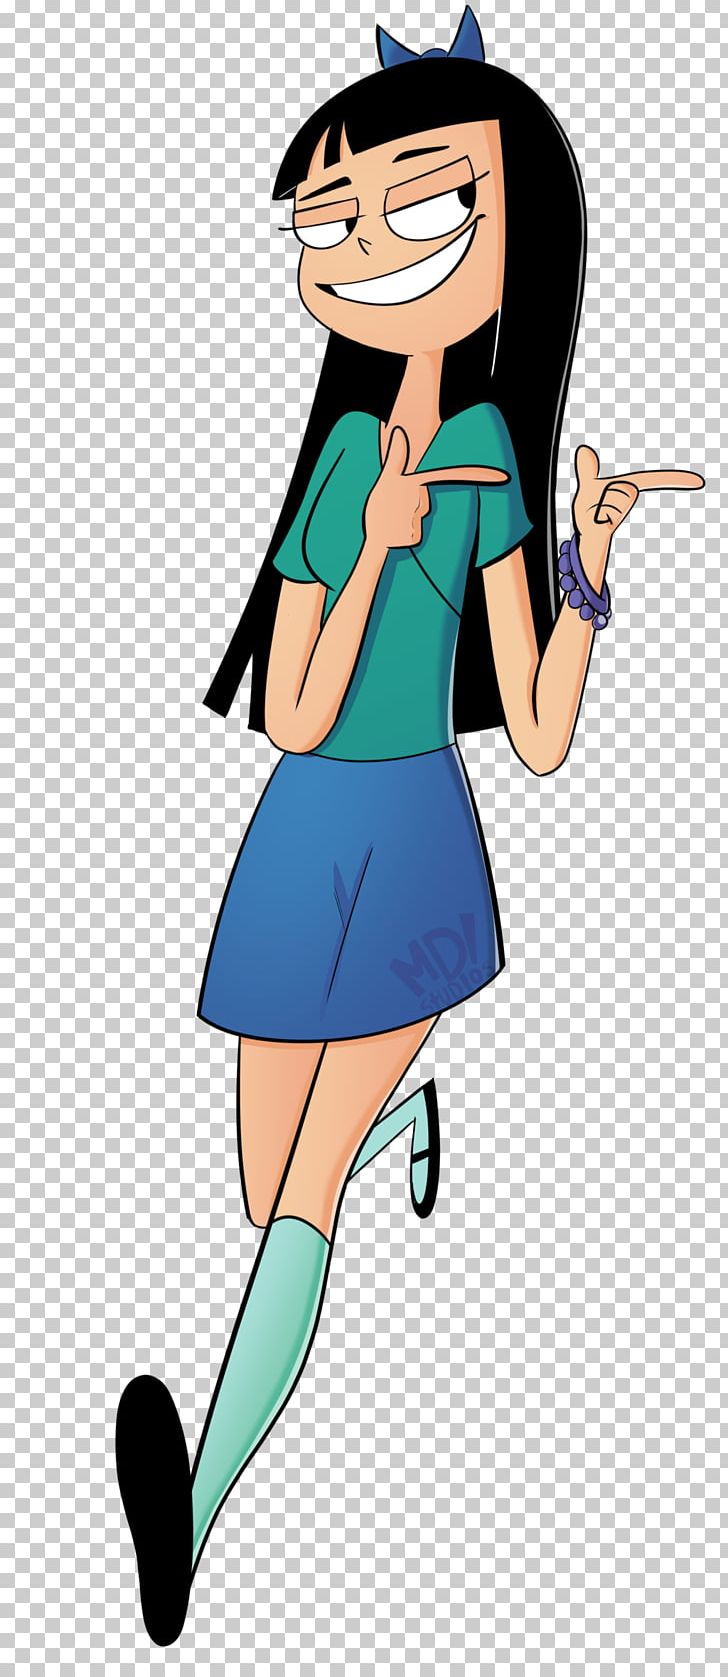 Stacy Hirano Phineas Flynn Candace Flynn Ferb Fletcher PNG, Clipart, Animated Cartoon, Animated Series, Art, Candace Flynn, Cartoon Free PNG Download